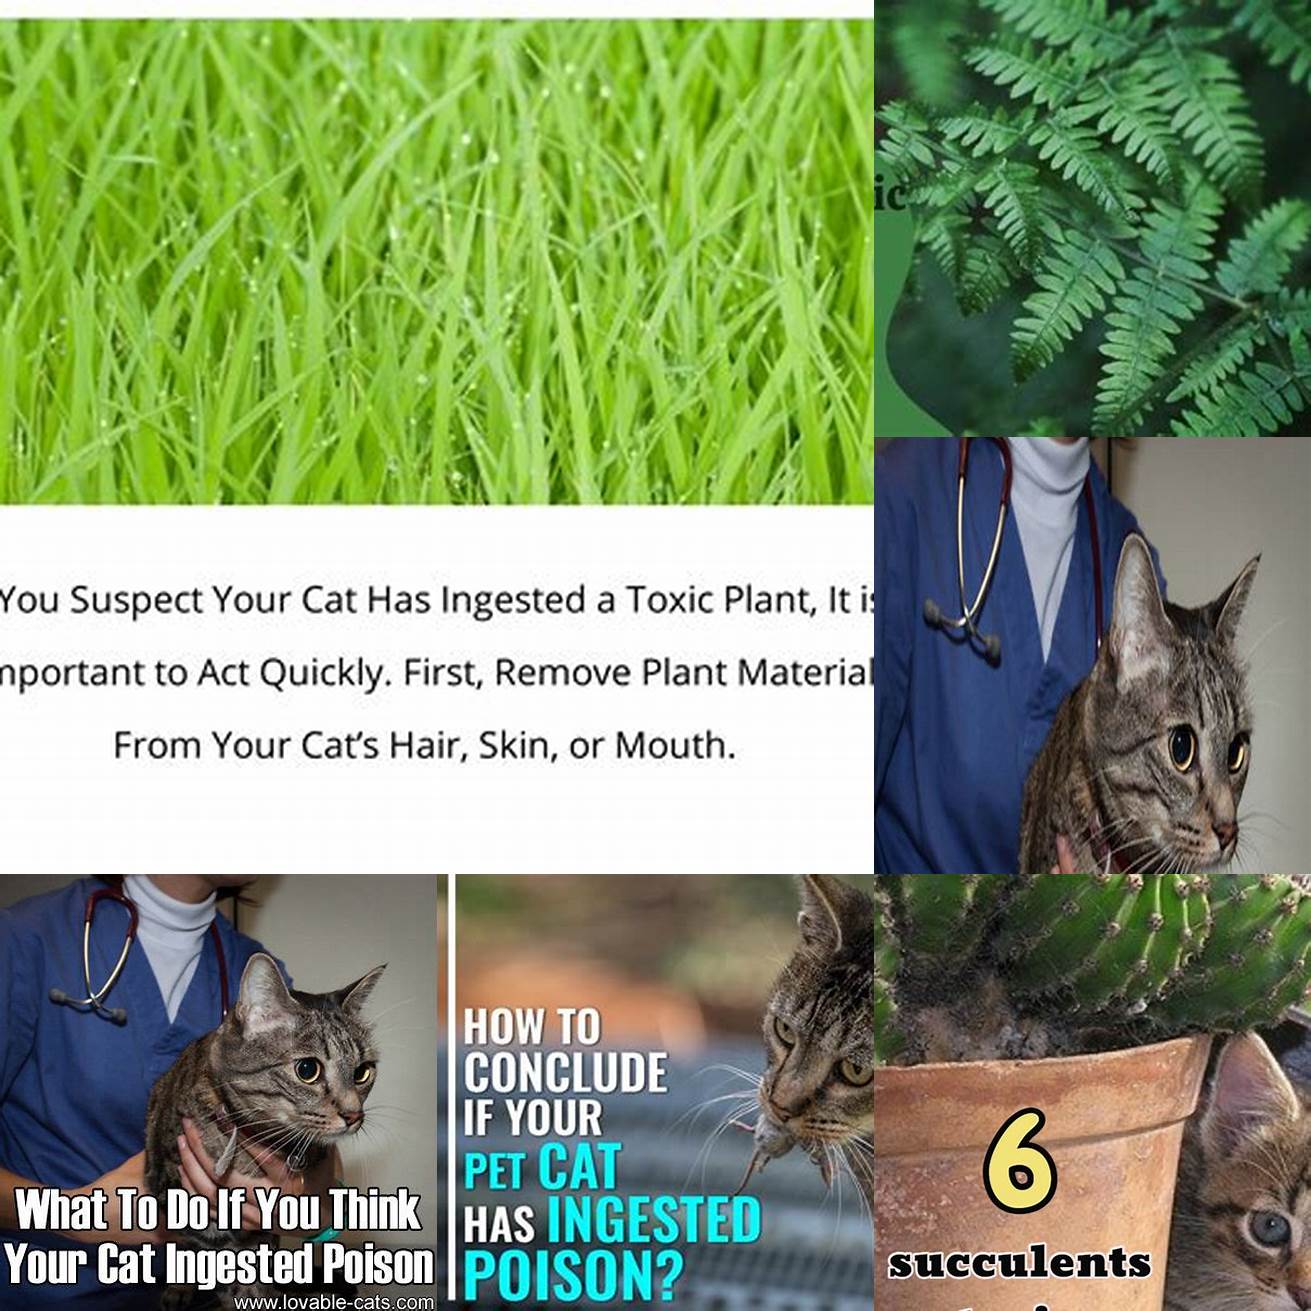 Q What should I do if I suspect that my cat has ingested a toxic plant